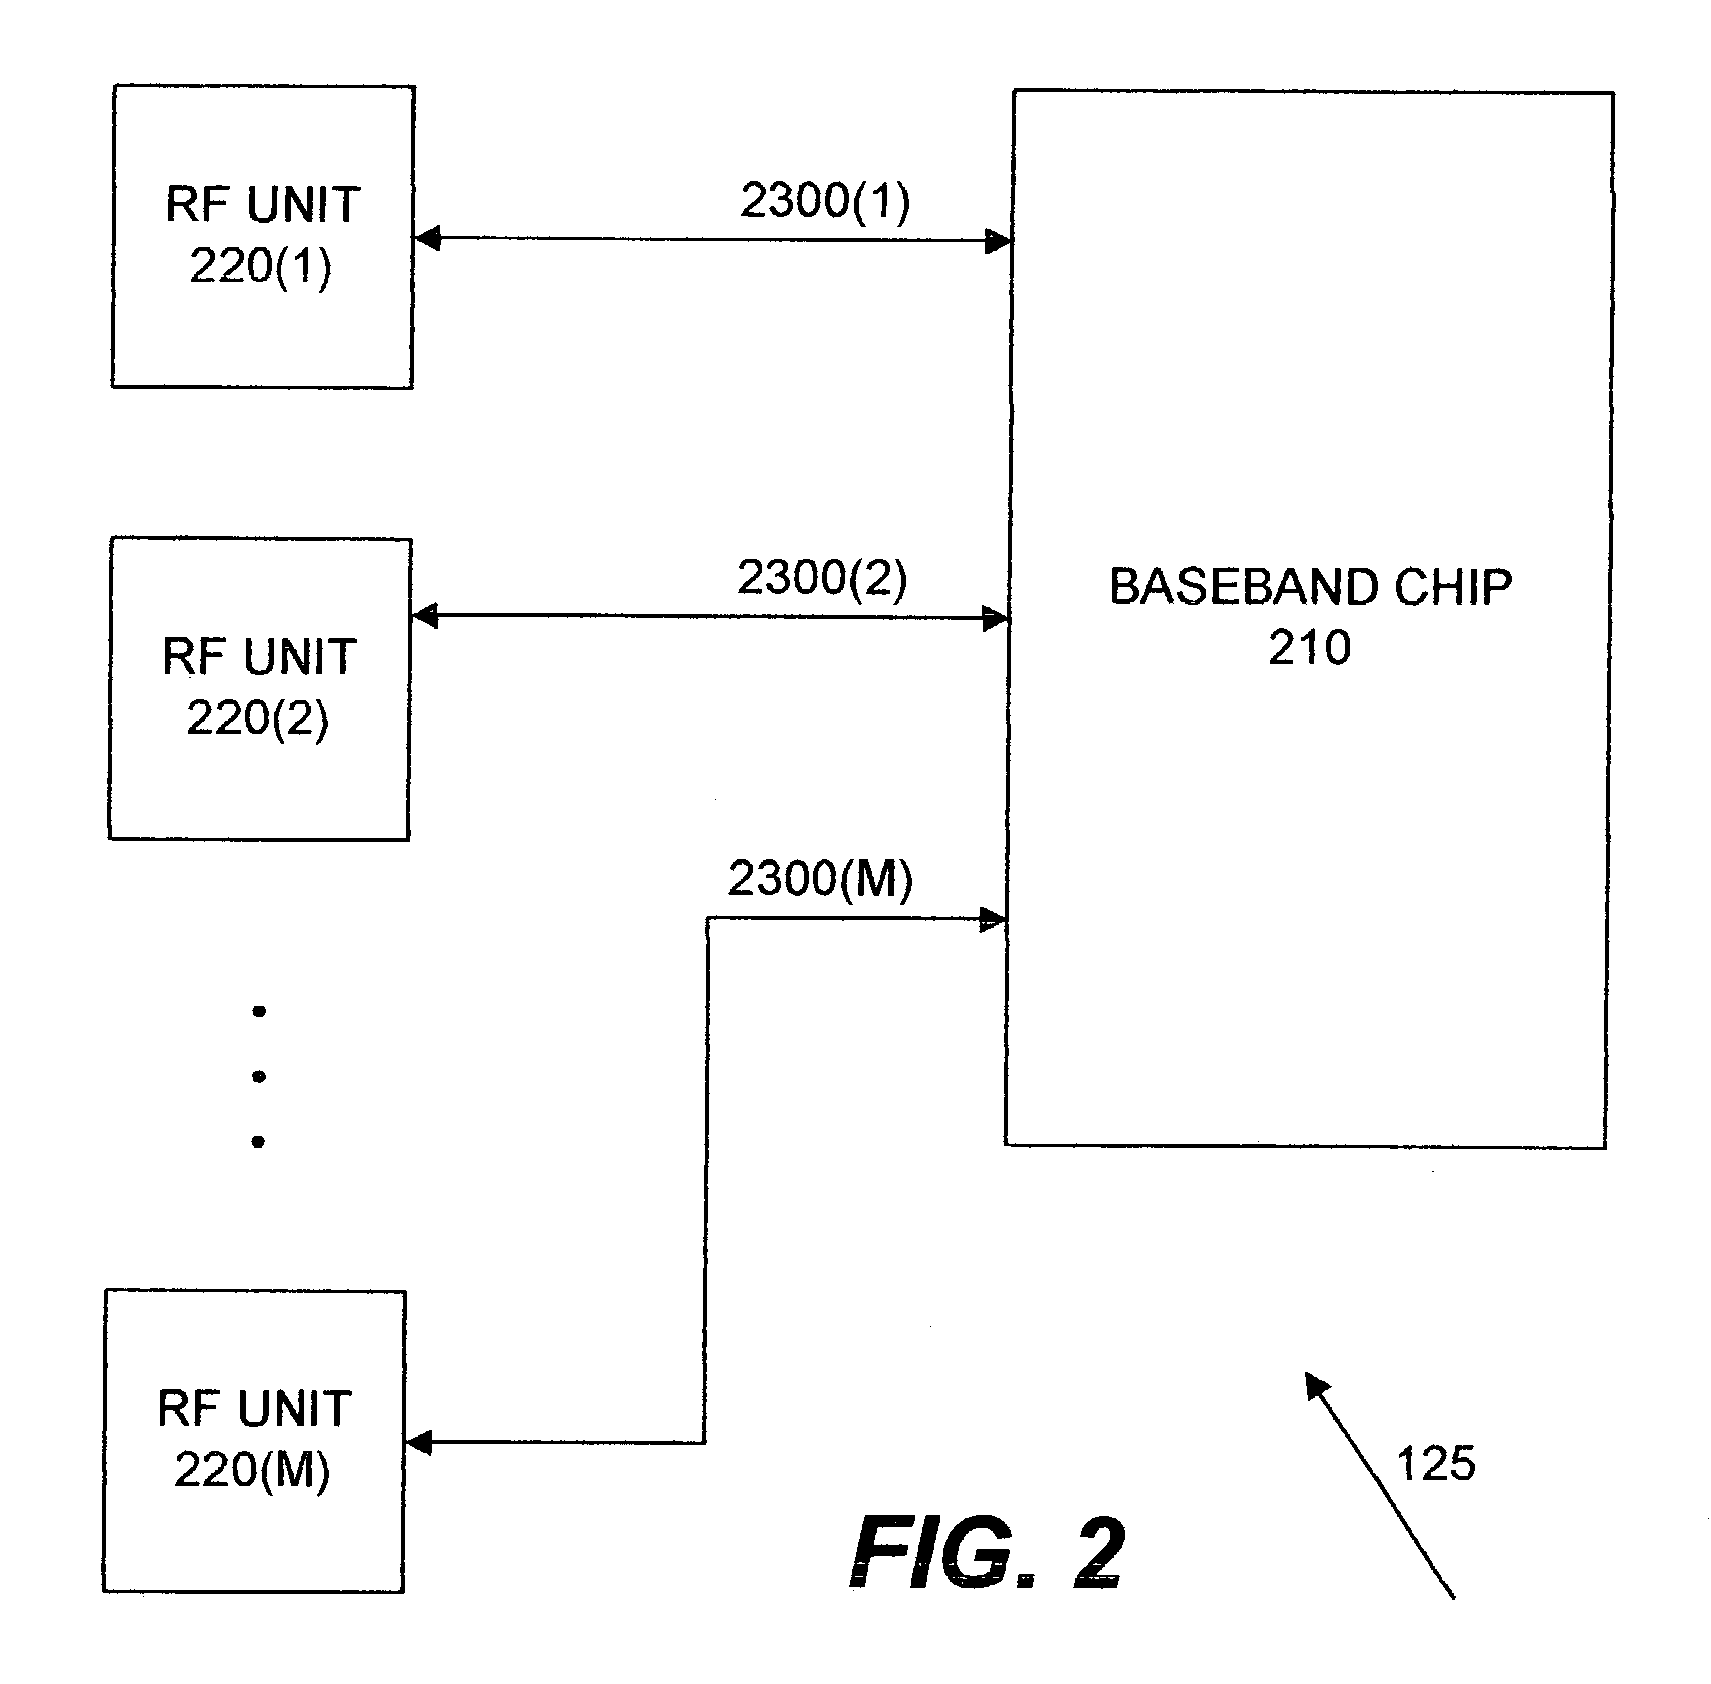 Selecting a set of antennas for use in a wireless communication system